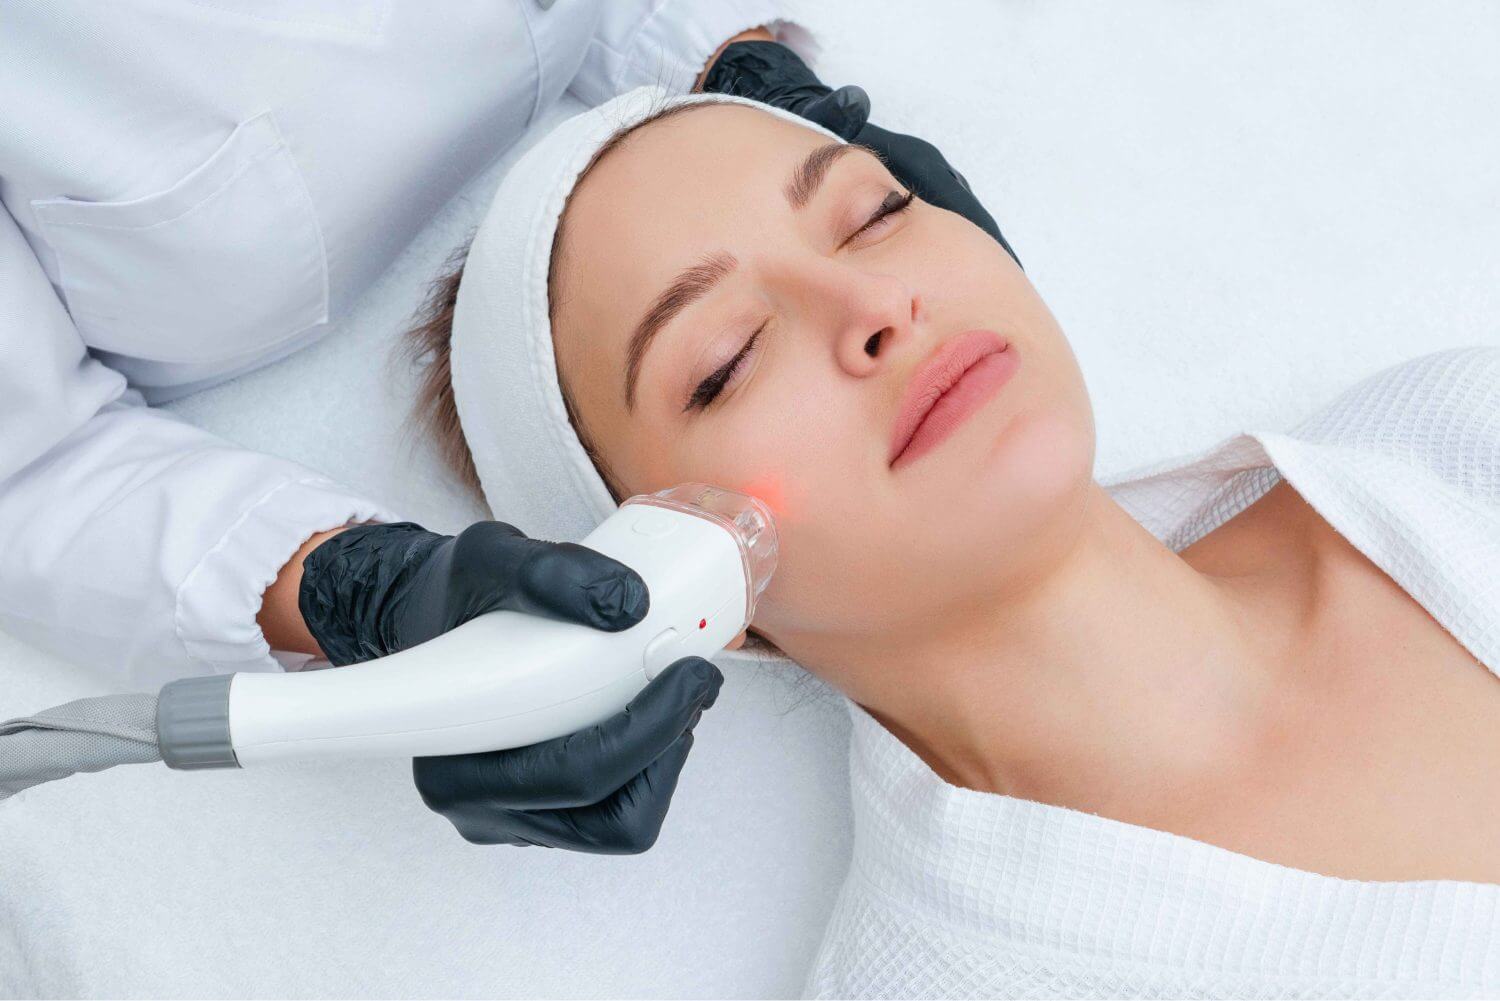 Laser hair removal treatment. Doctor holding. Clinic skin care procedure. Medical dermatology photo equipment. People epilation device. Cosmetology technology salon epilation. Body aesthetic | SavvyDerm Skin Clinic in Millville DE